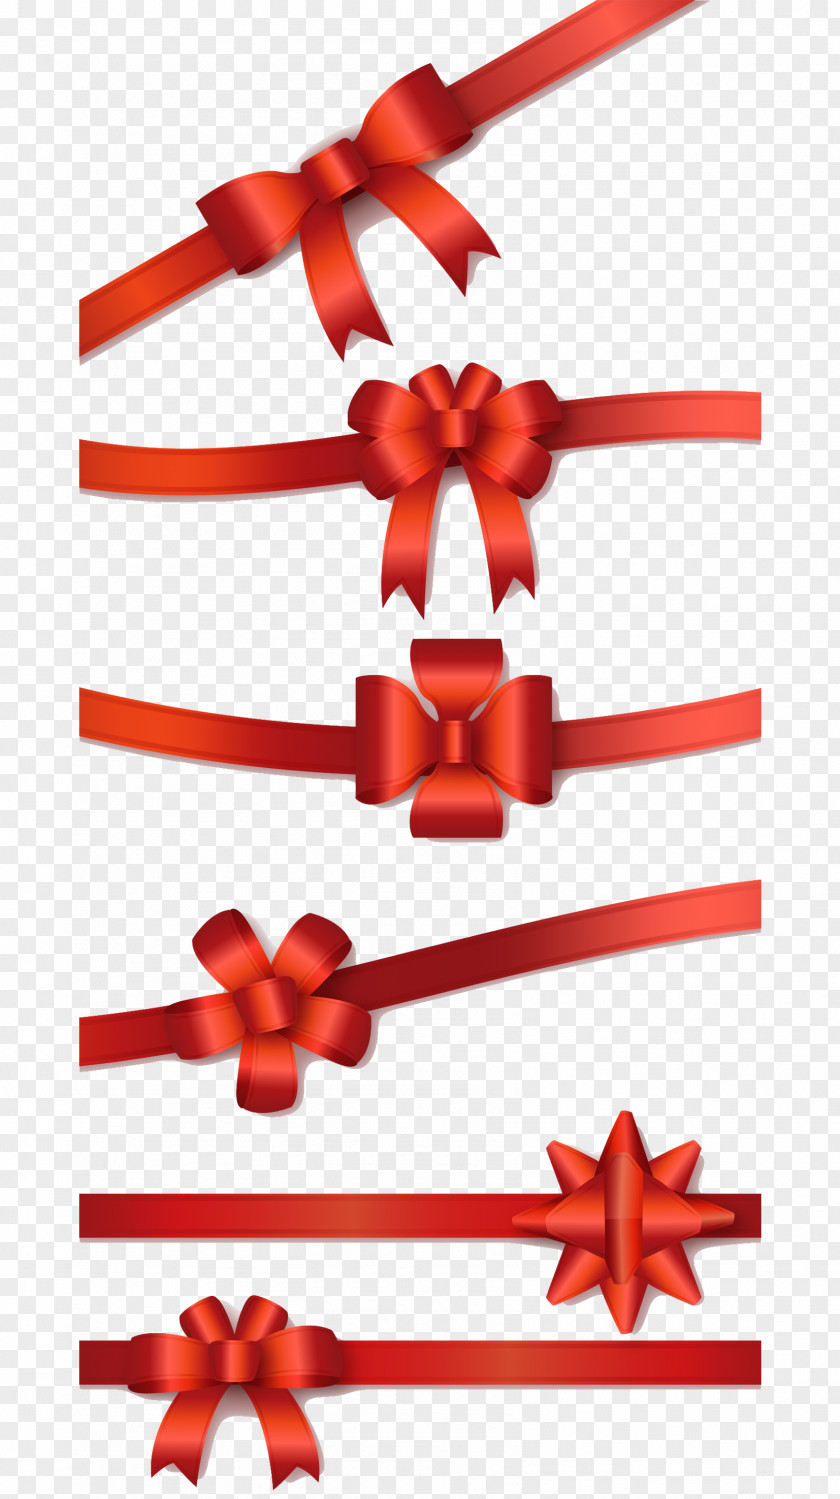 6 Red Ribbon Bow Vector Euclidean Download PNG